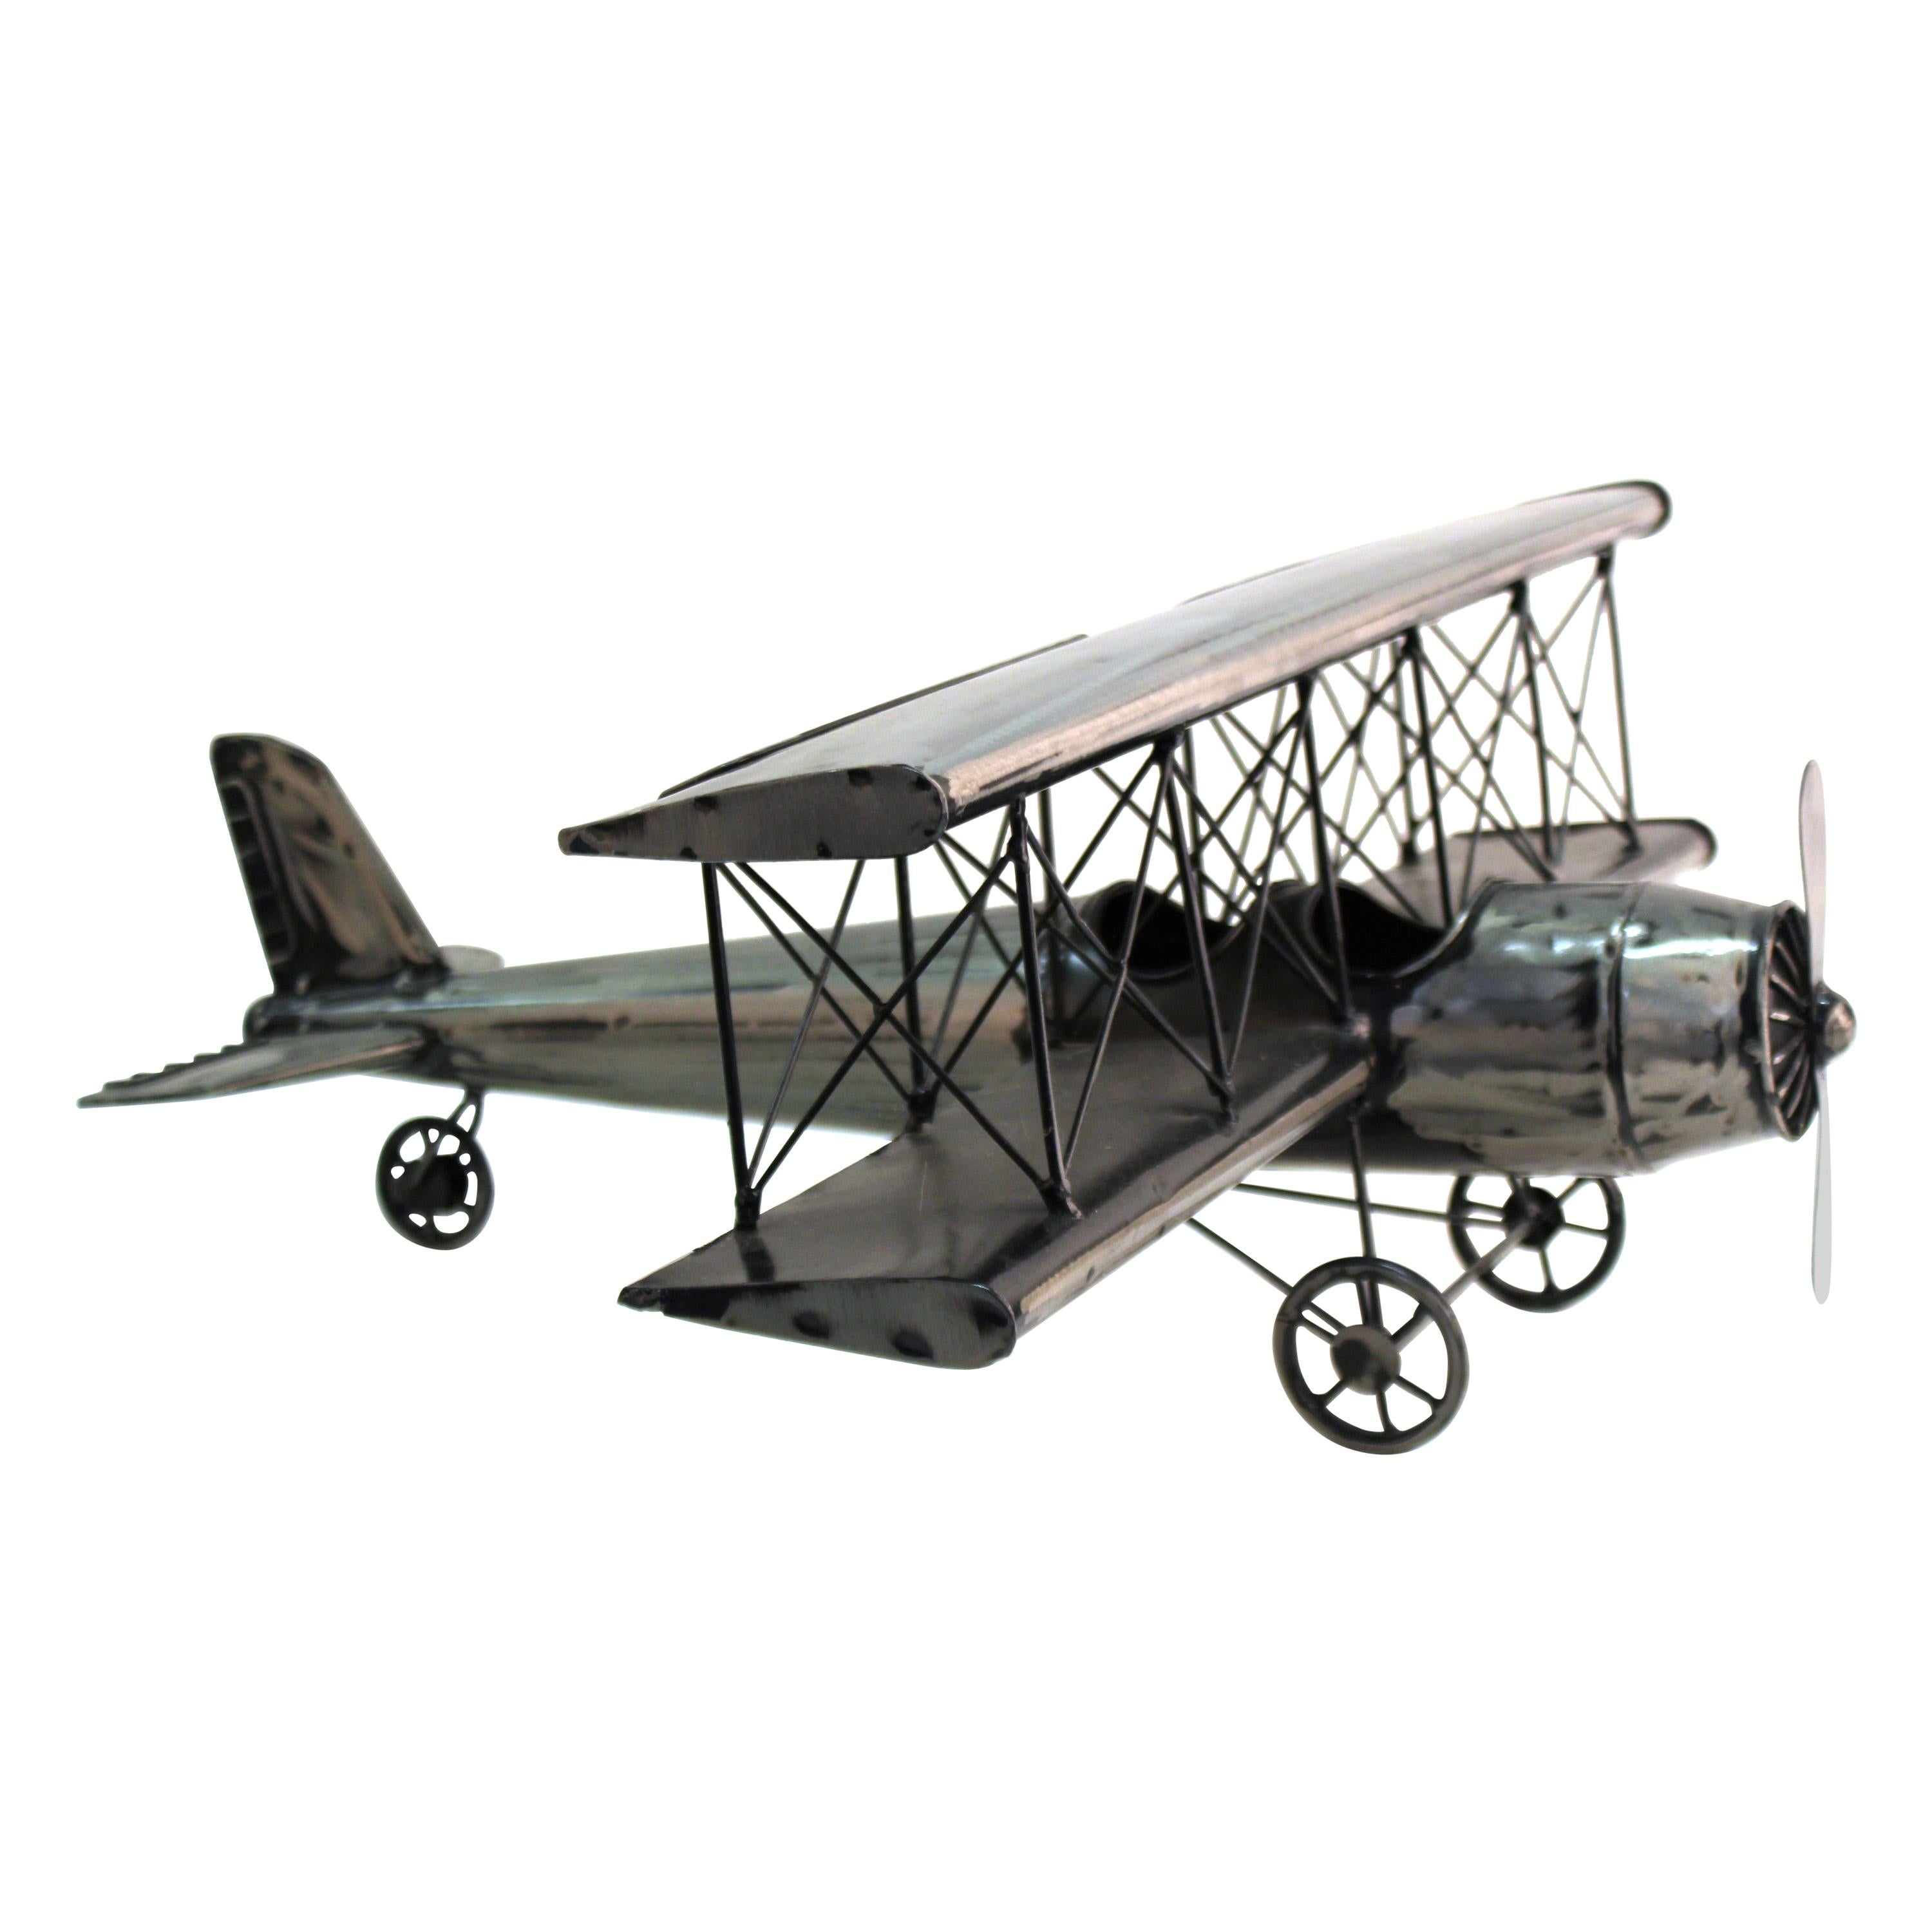 Modern Metal Airplane Model Collectible